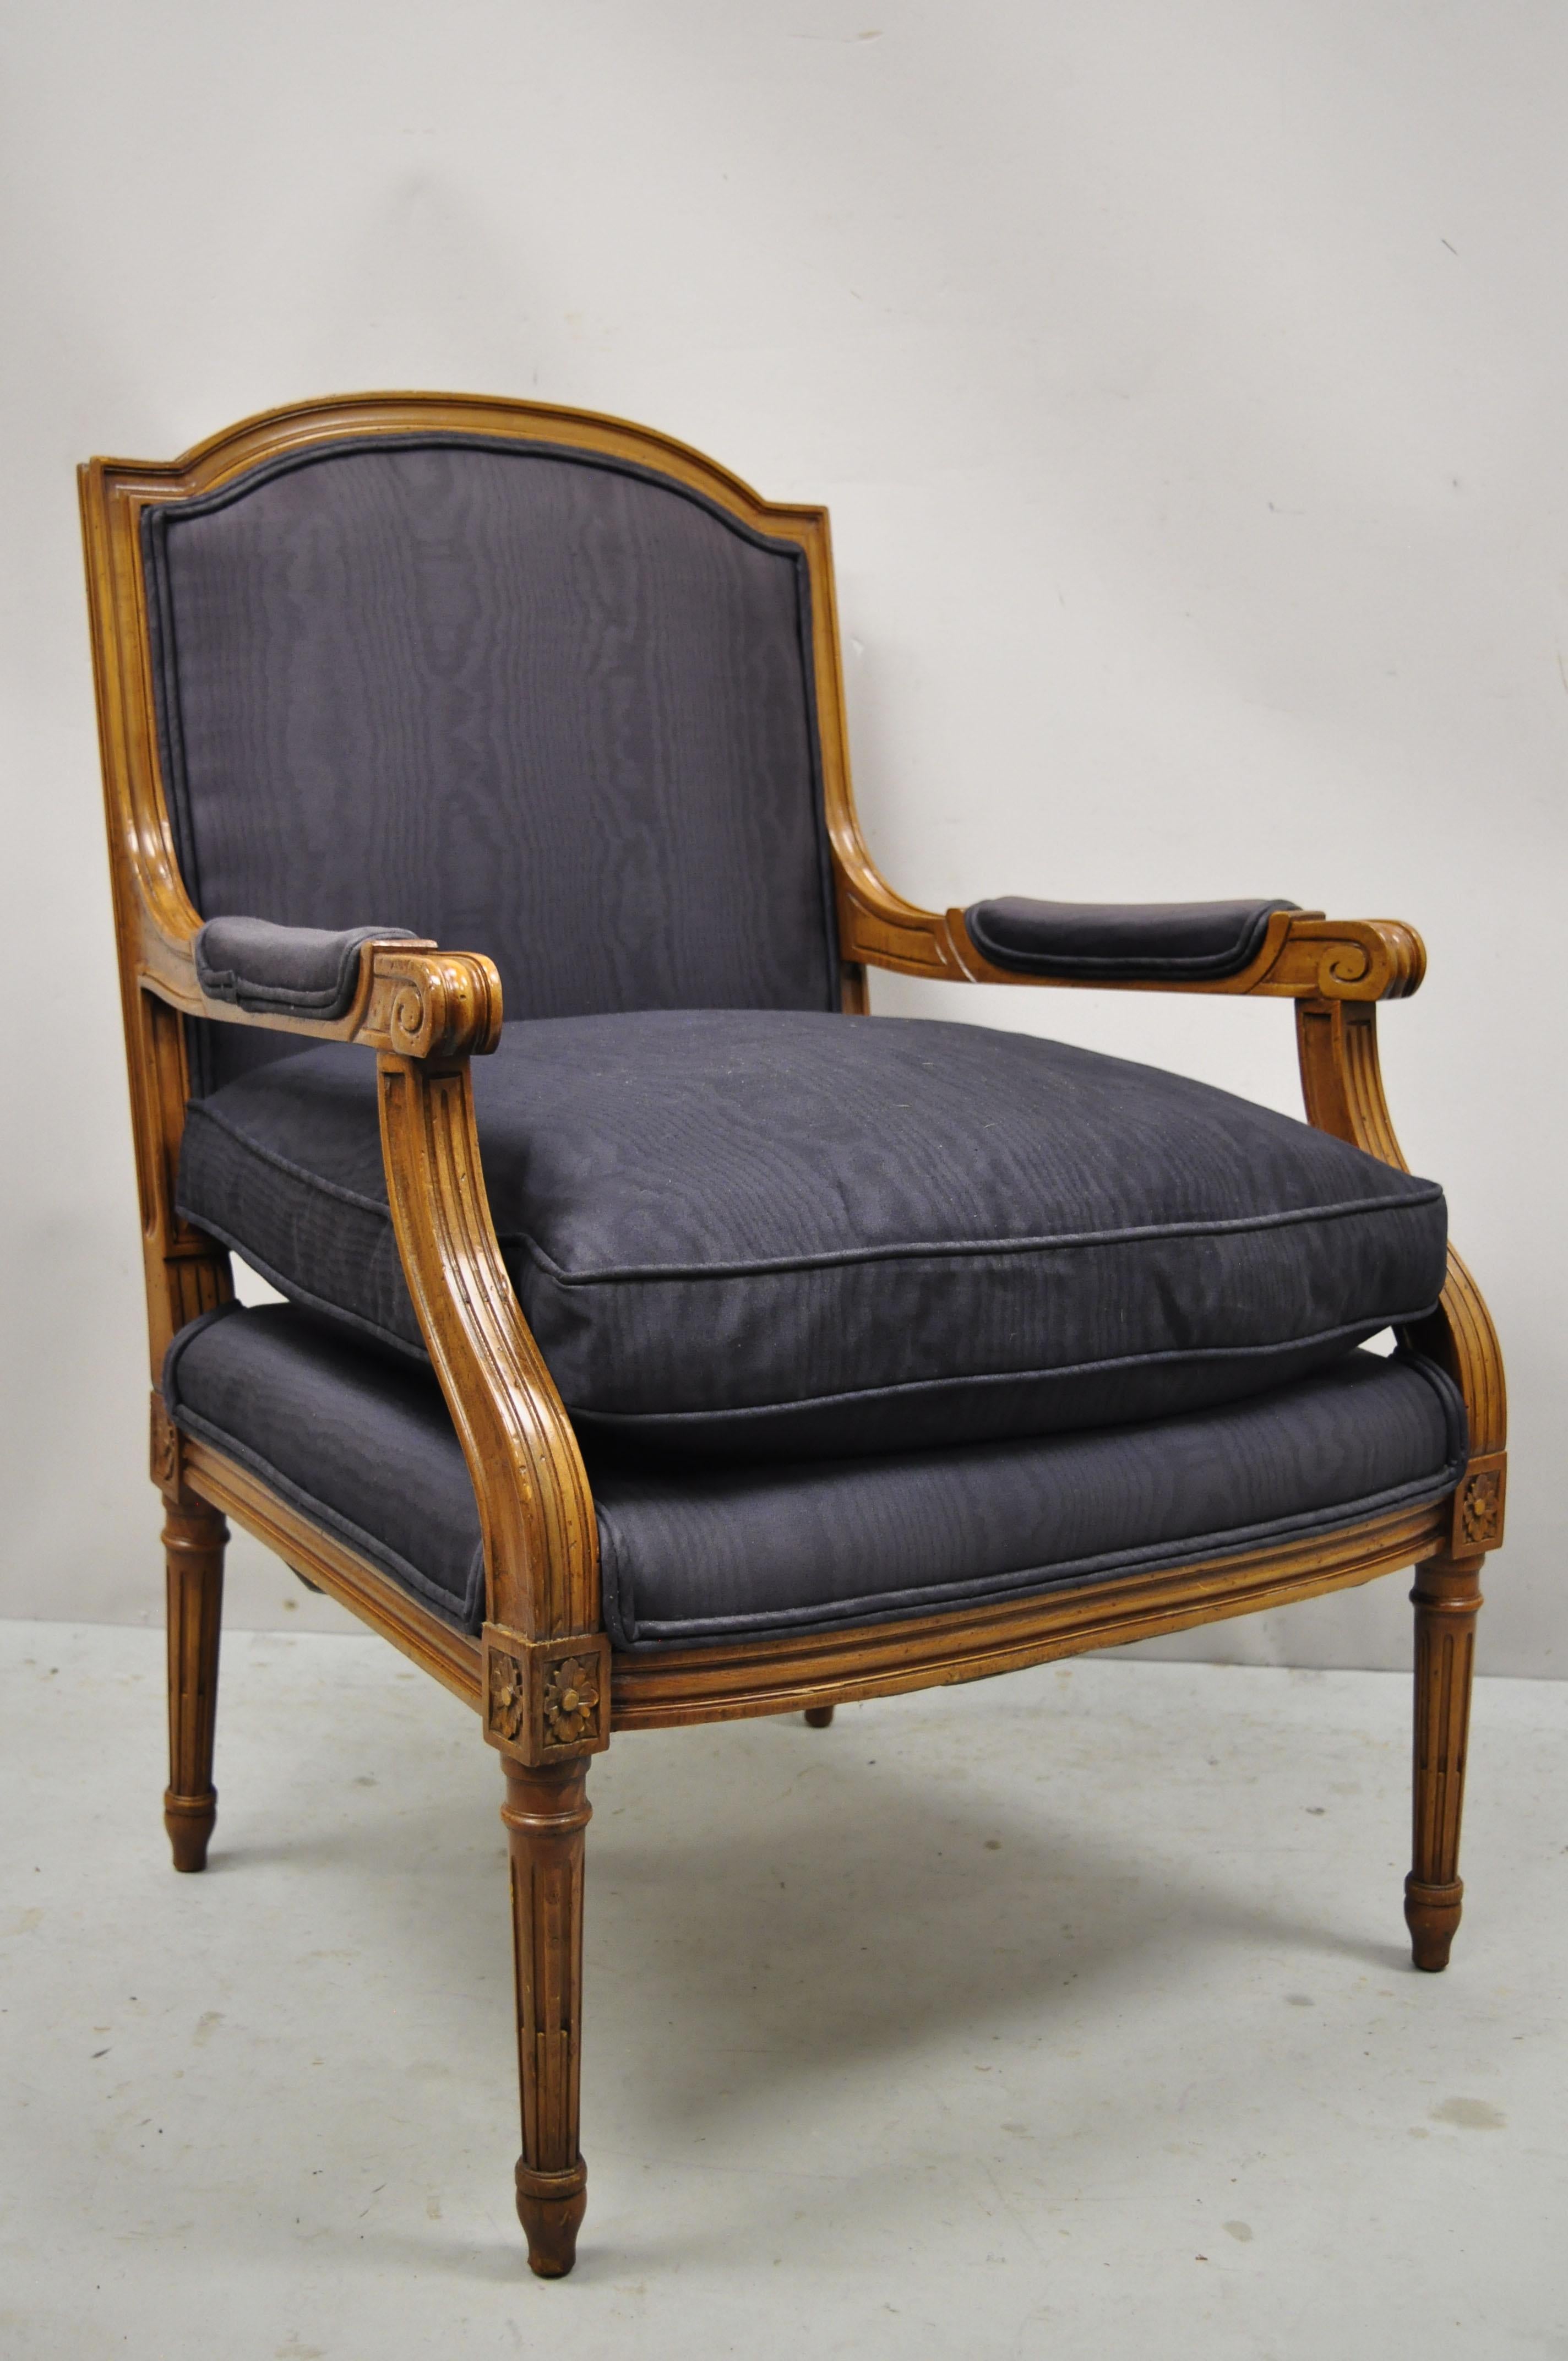 Vintage French Provincial Louis XVI style bergere fireside lounge arm club chair. Item features solid wood construction, upholstered arm rests, distressed finish, tapered legs, very nice vintage item, great style and form. Circa mid 20th century.